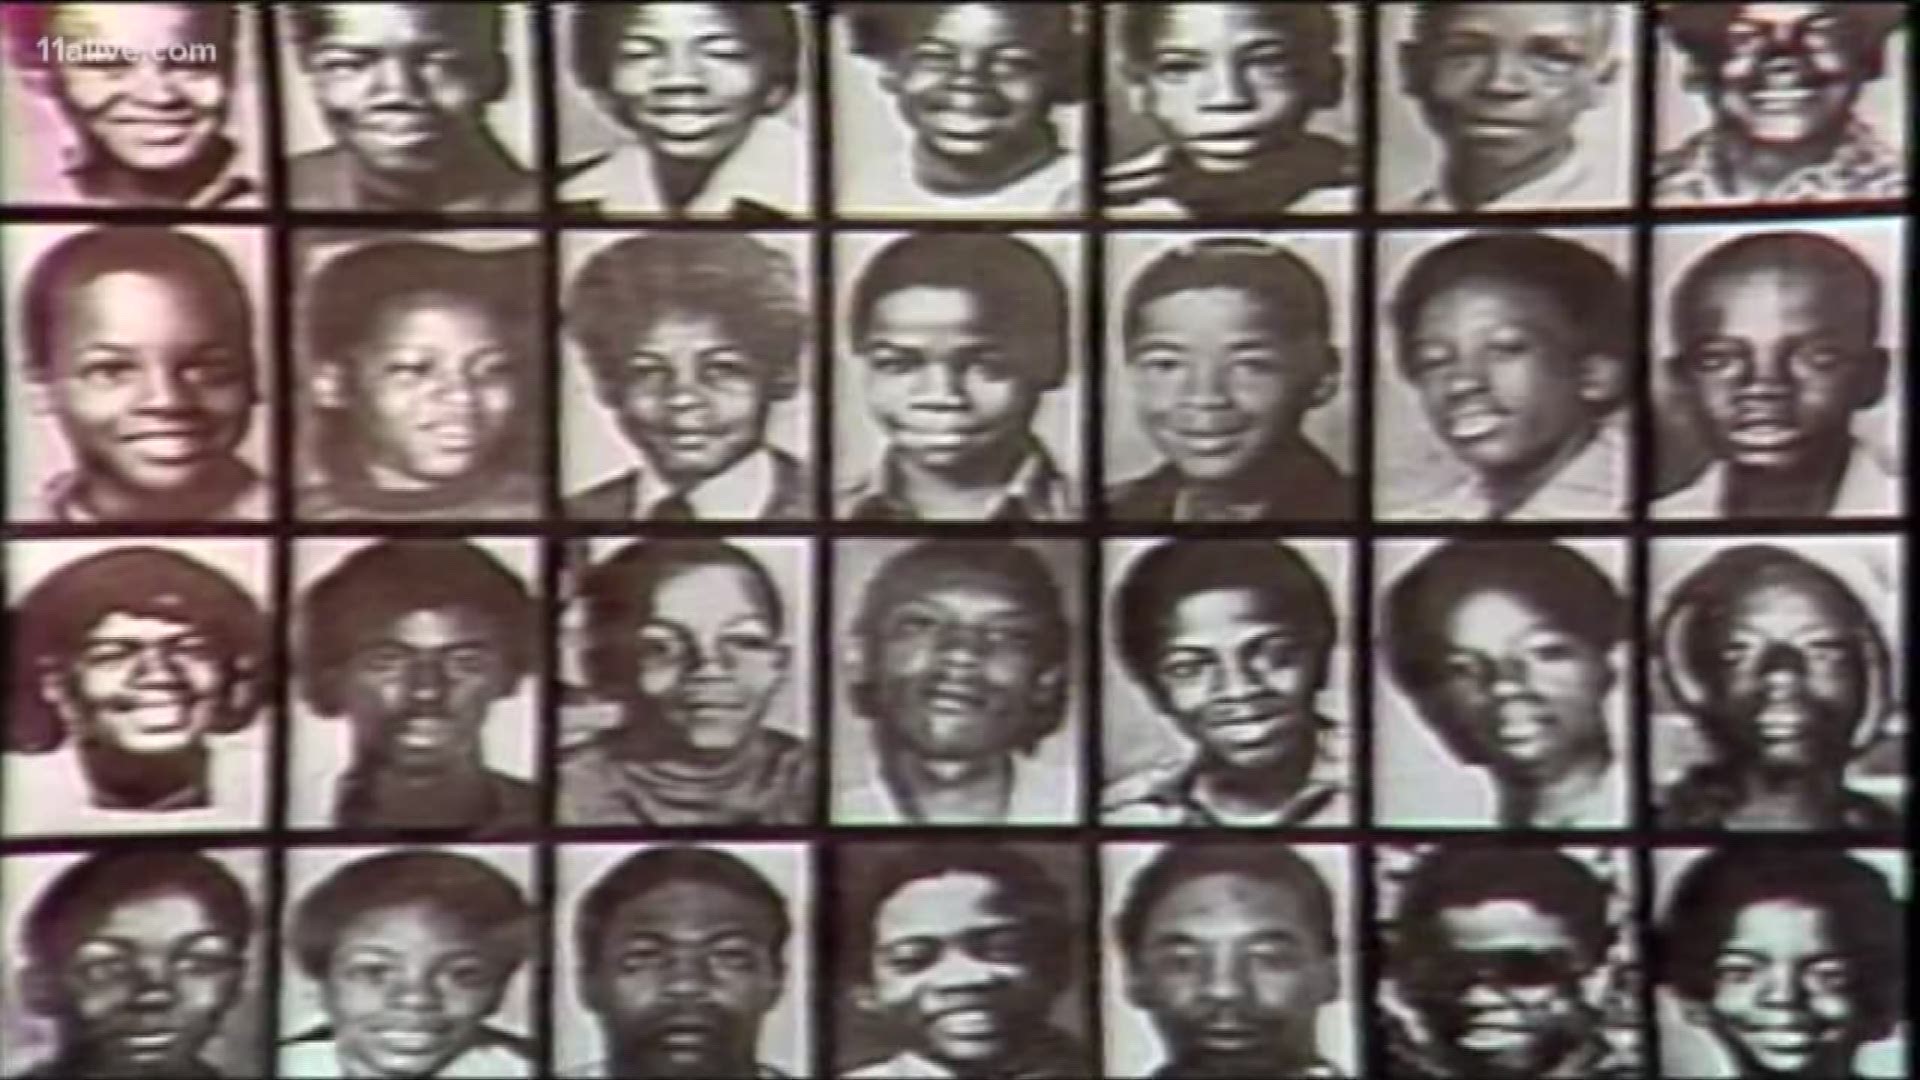 The murders started 40 years ago and still haunts people across Atlanta today.